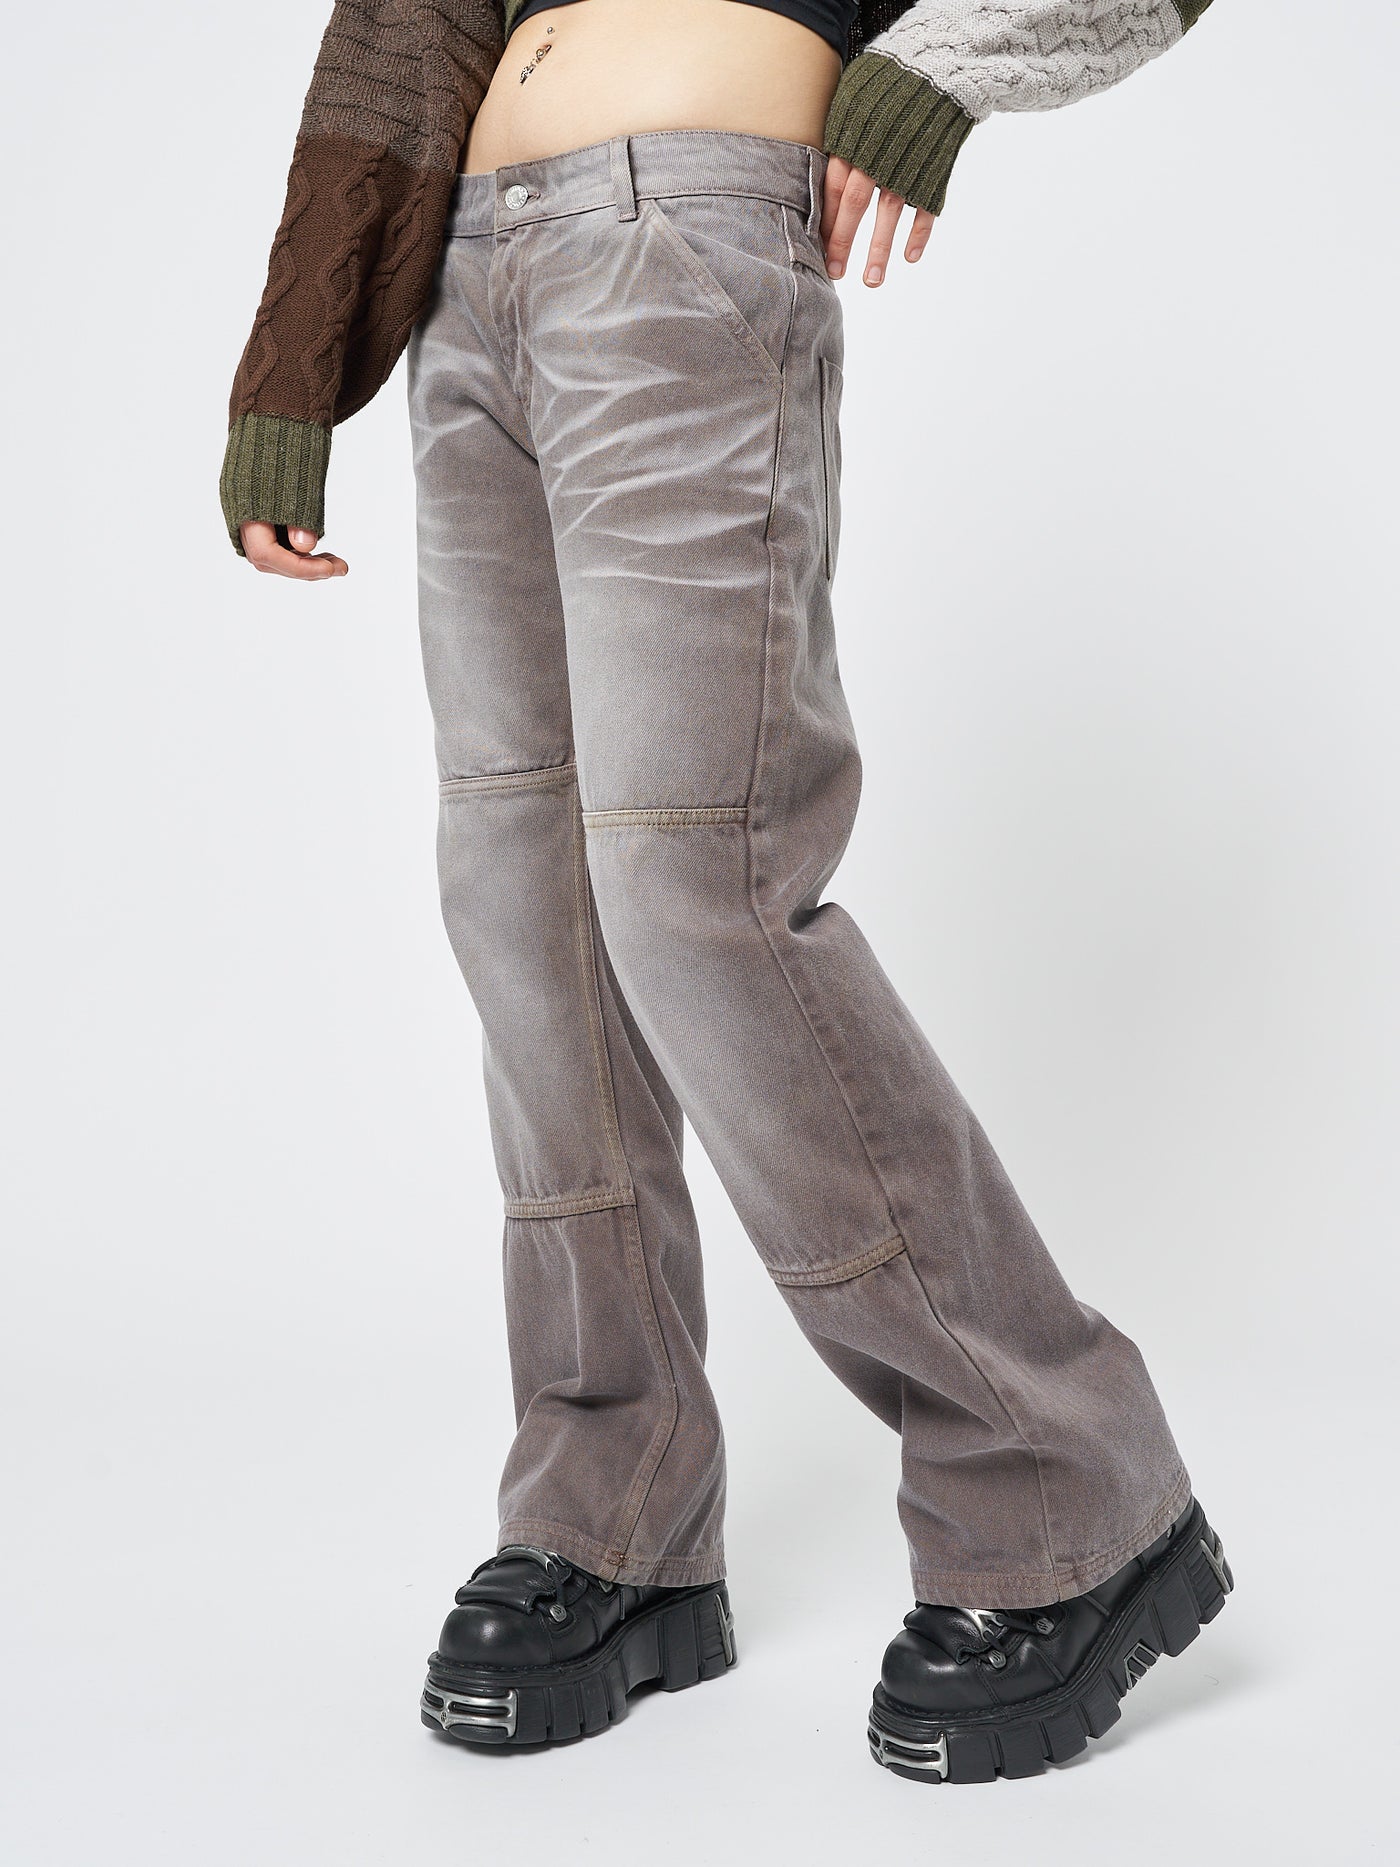 These brown straight jeans feature a washed finish for a relaxed and casual look.